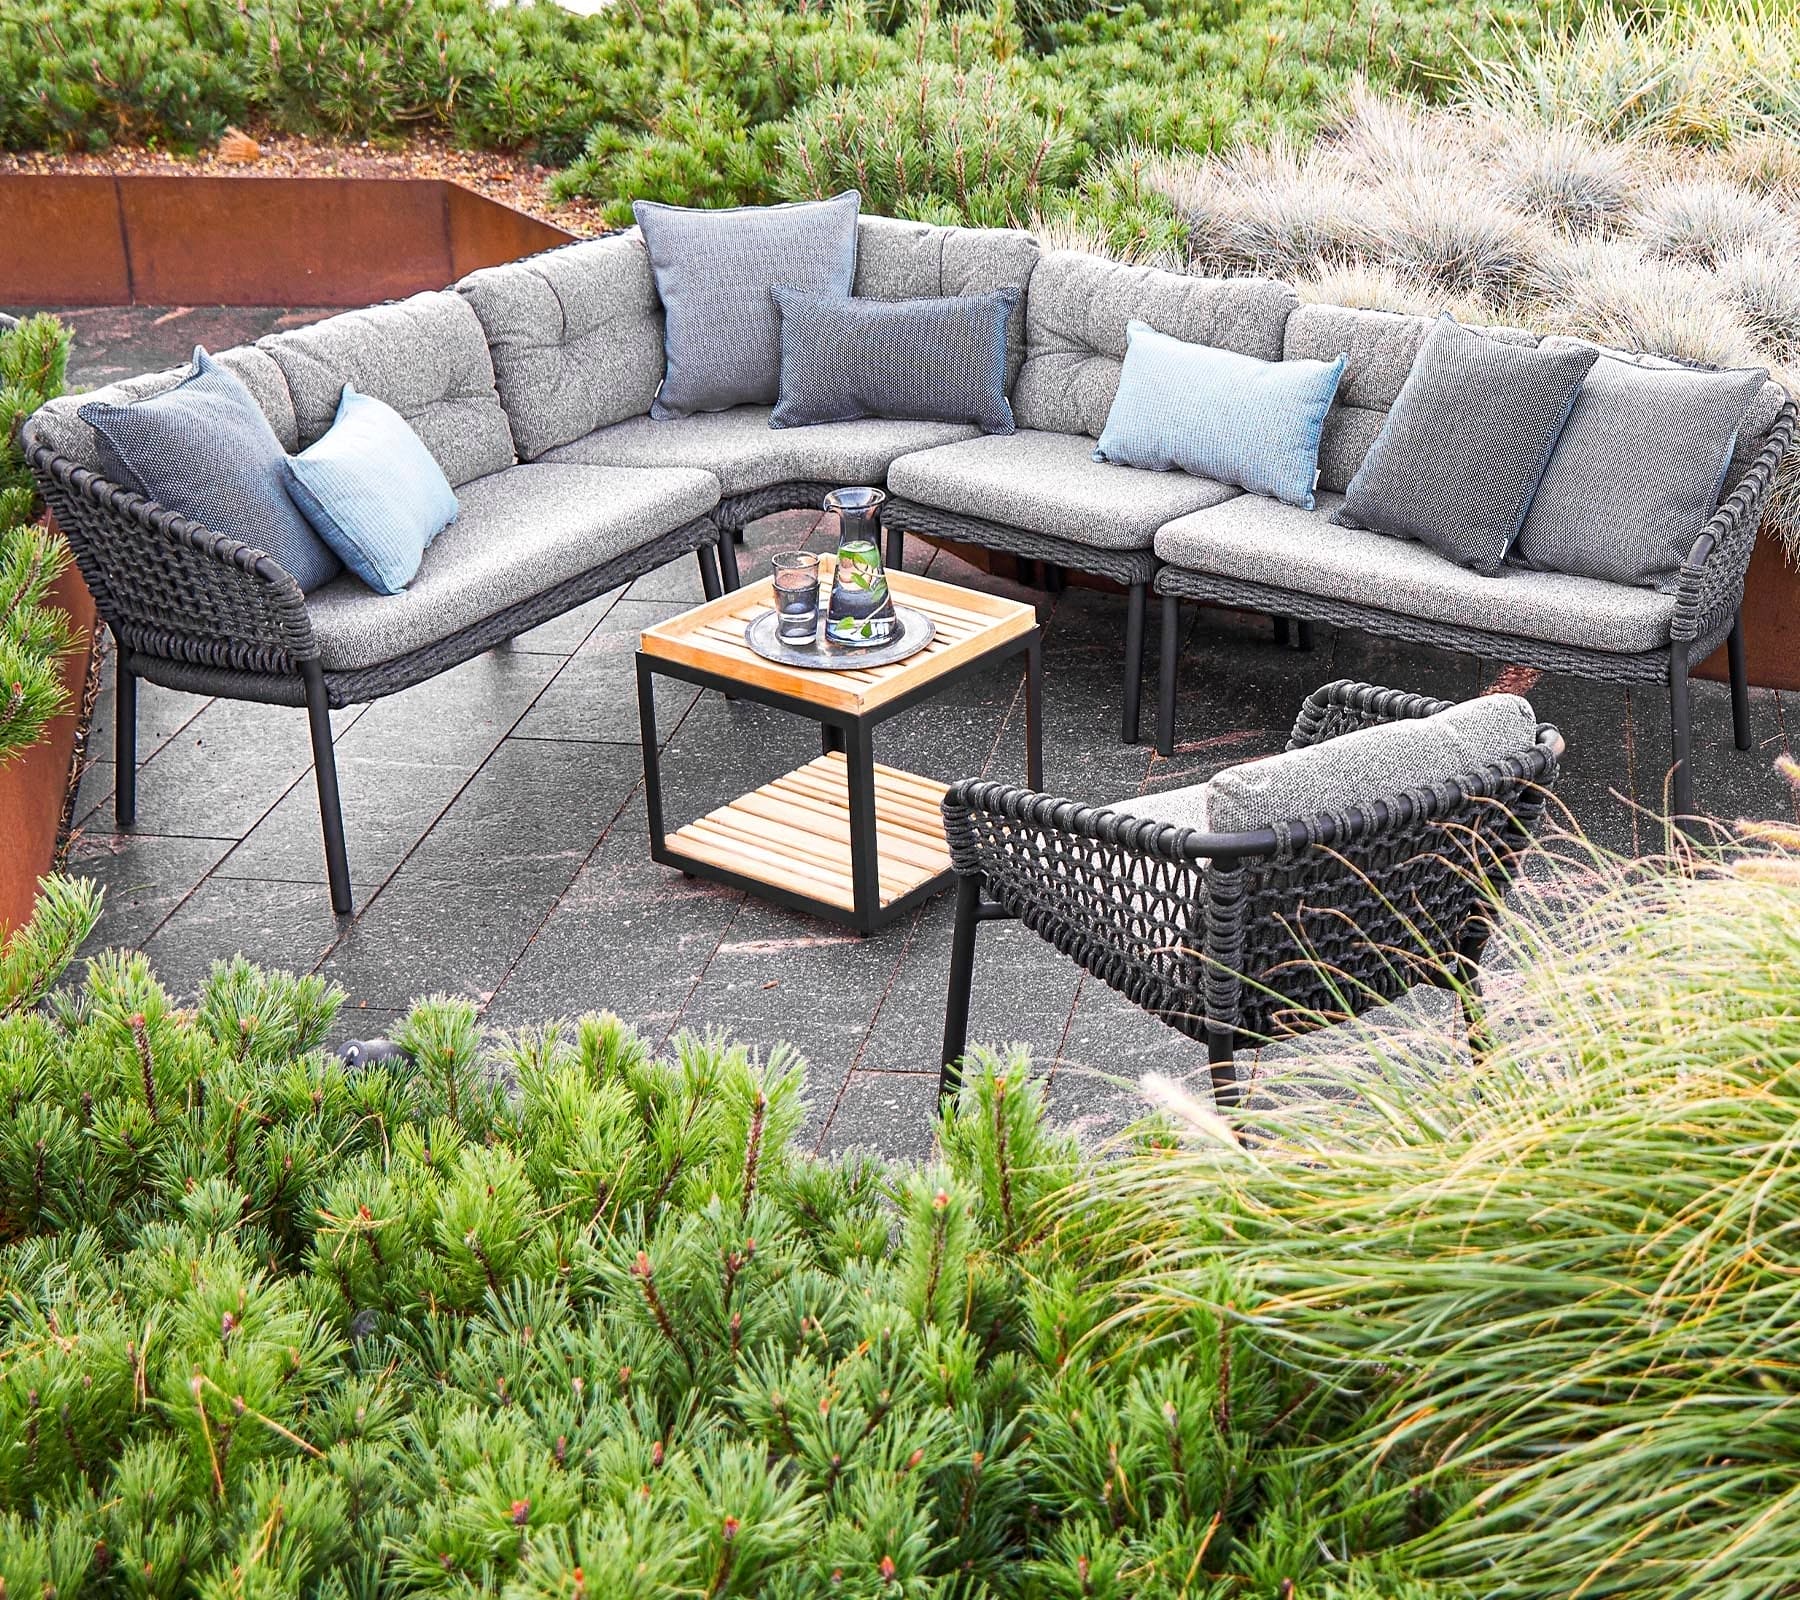 Boxhill's Ocean Outdoor Corner Sofa Module lifestyle image with other Ocean Module Sofa and Chair Collection, and Level Coffee Table with Teak top at patio